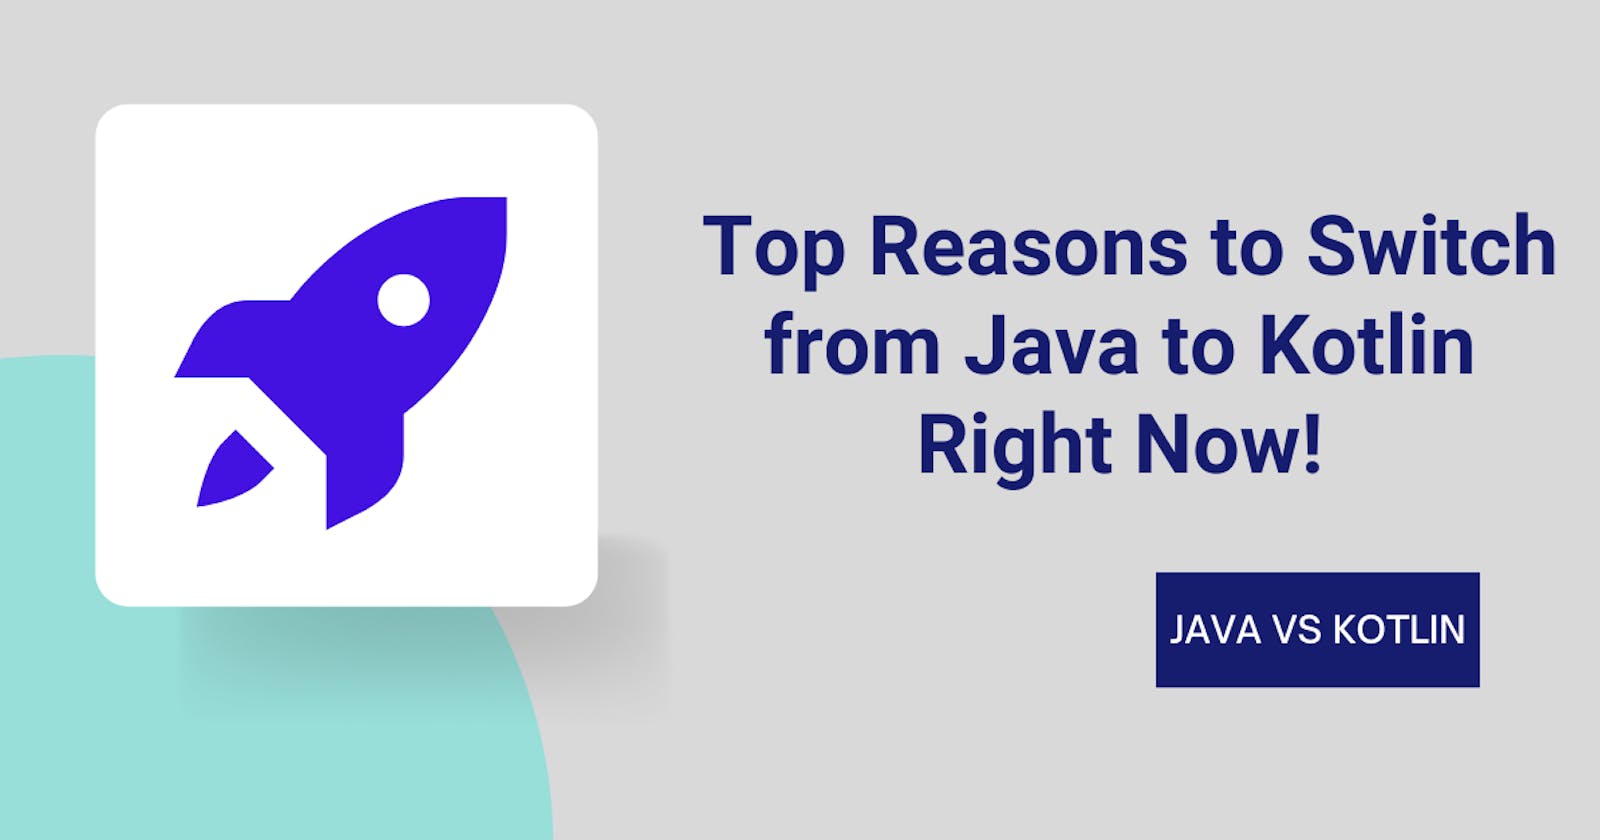 Top Reasons to Switch from Java to Kotlin Right Now!